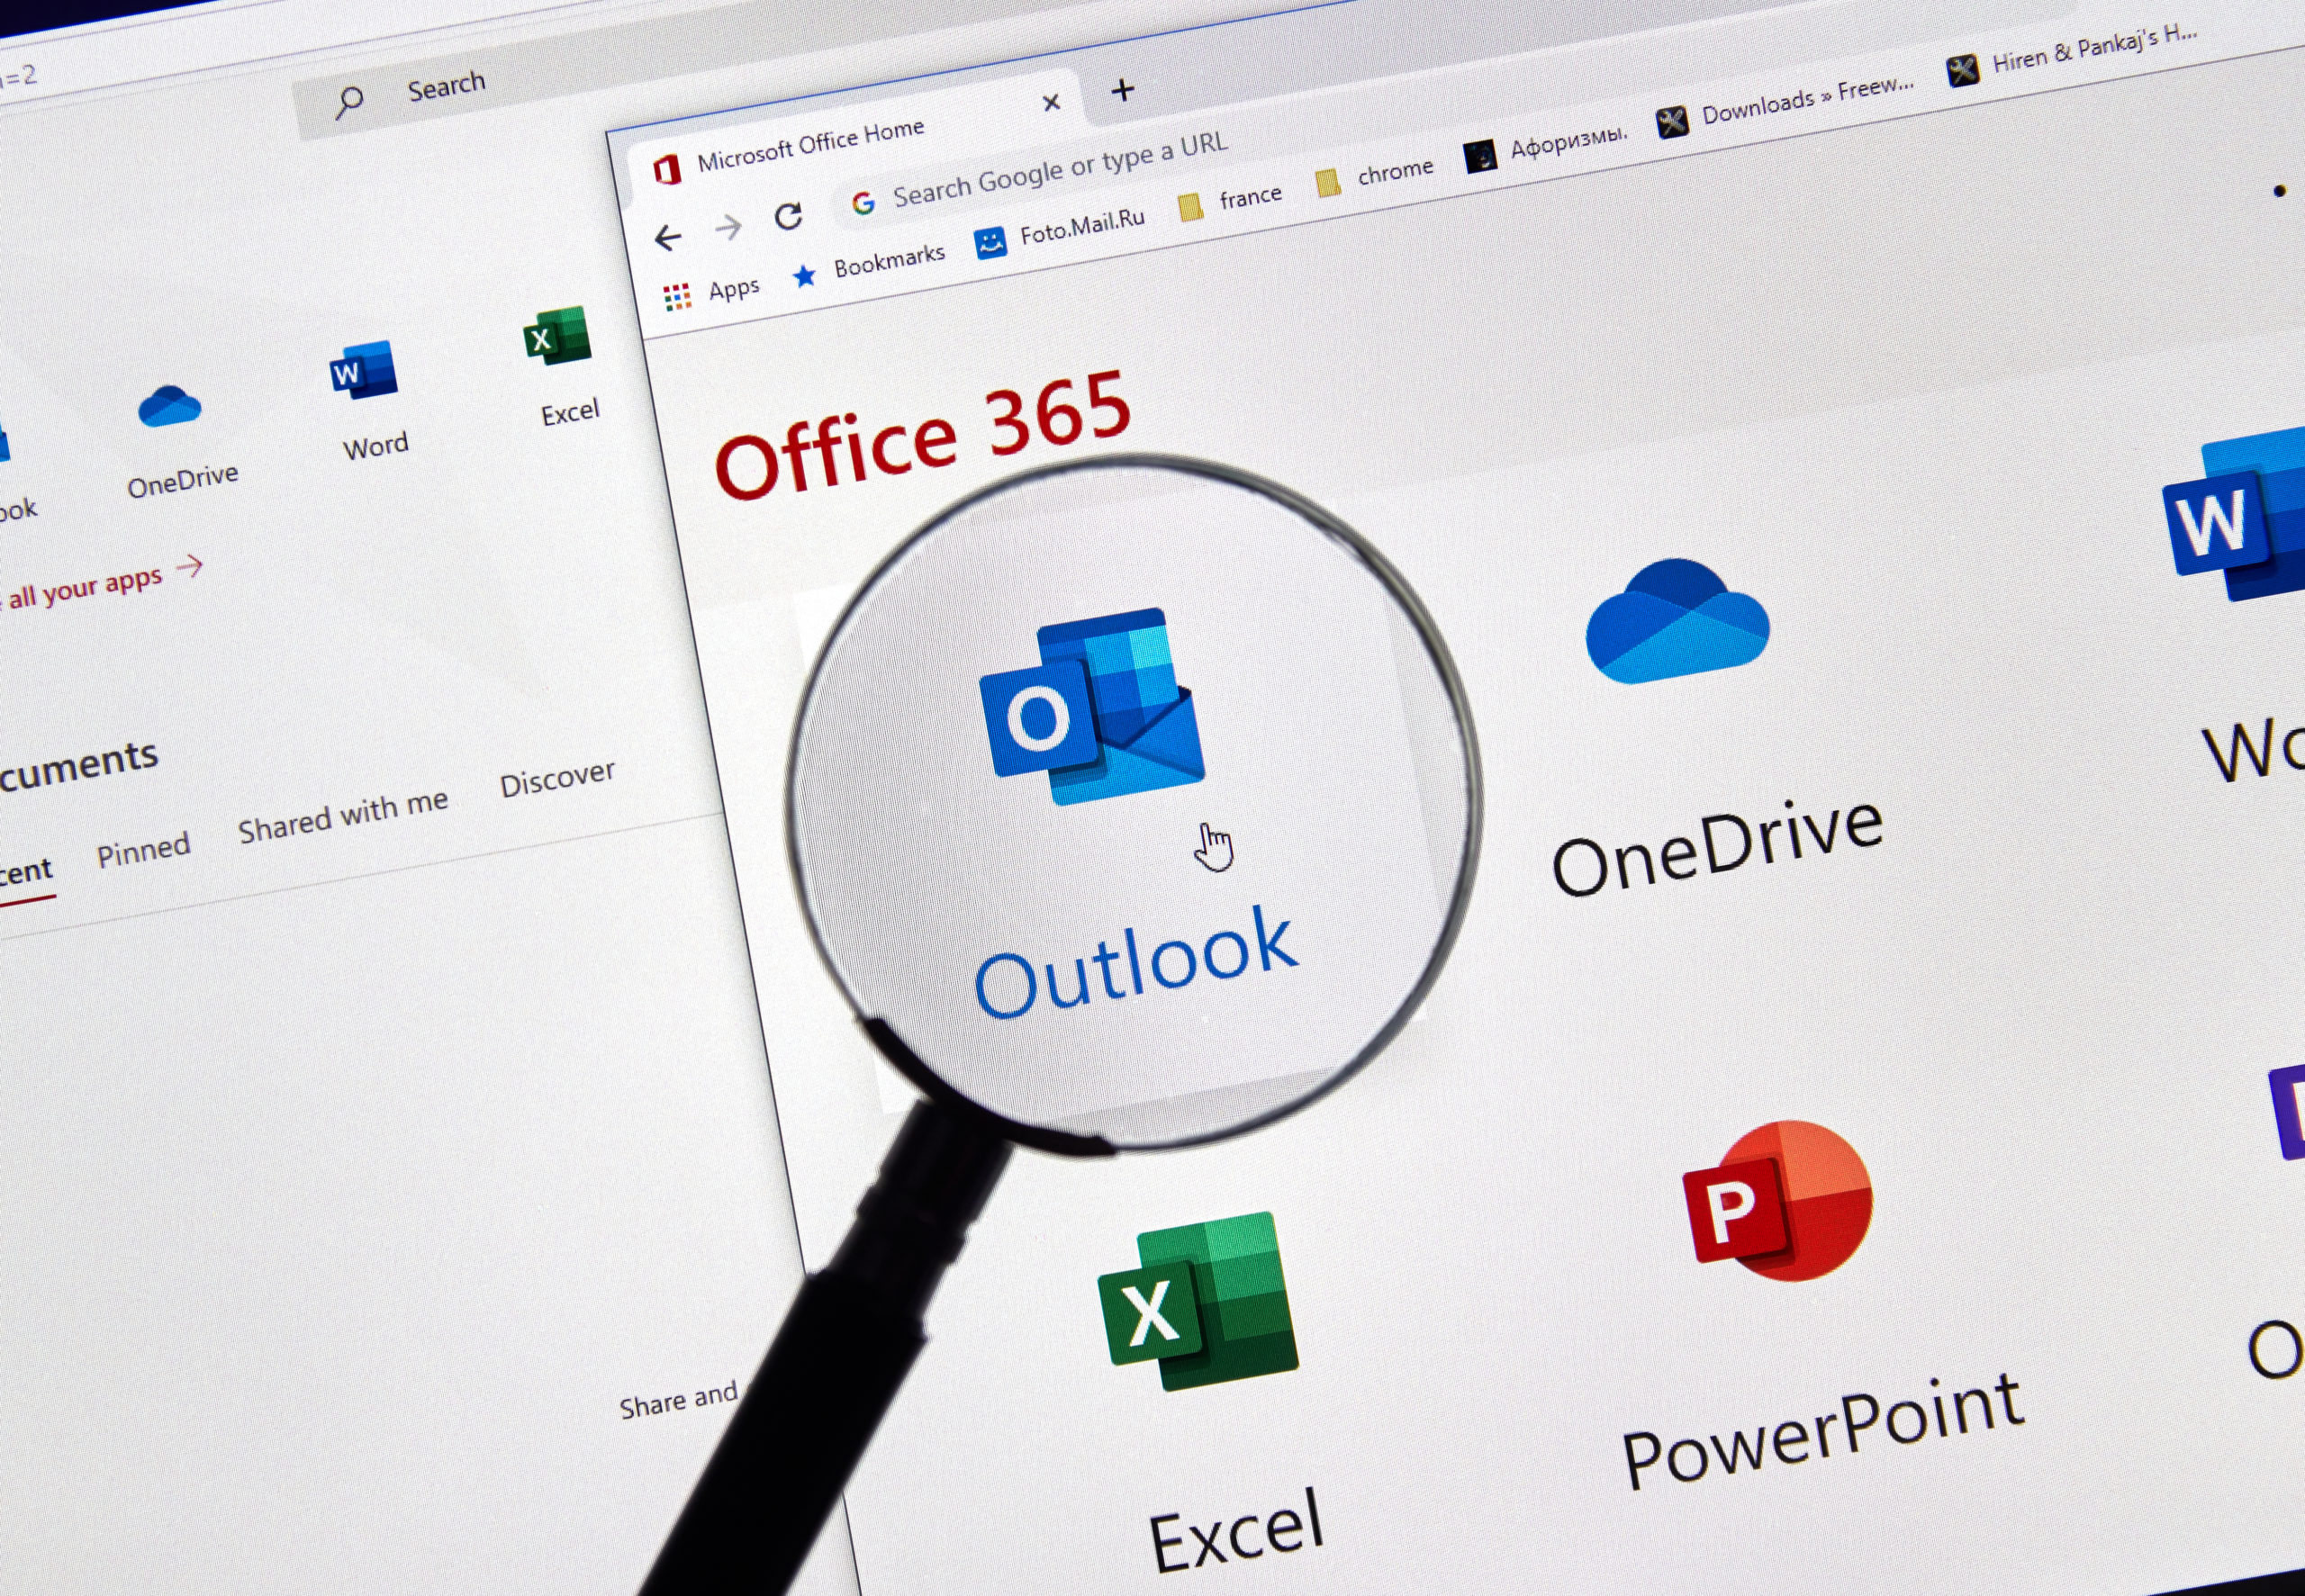 Coming Soon: Microsoft Search Rolling Out Across All Office apps